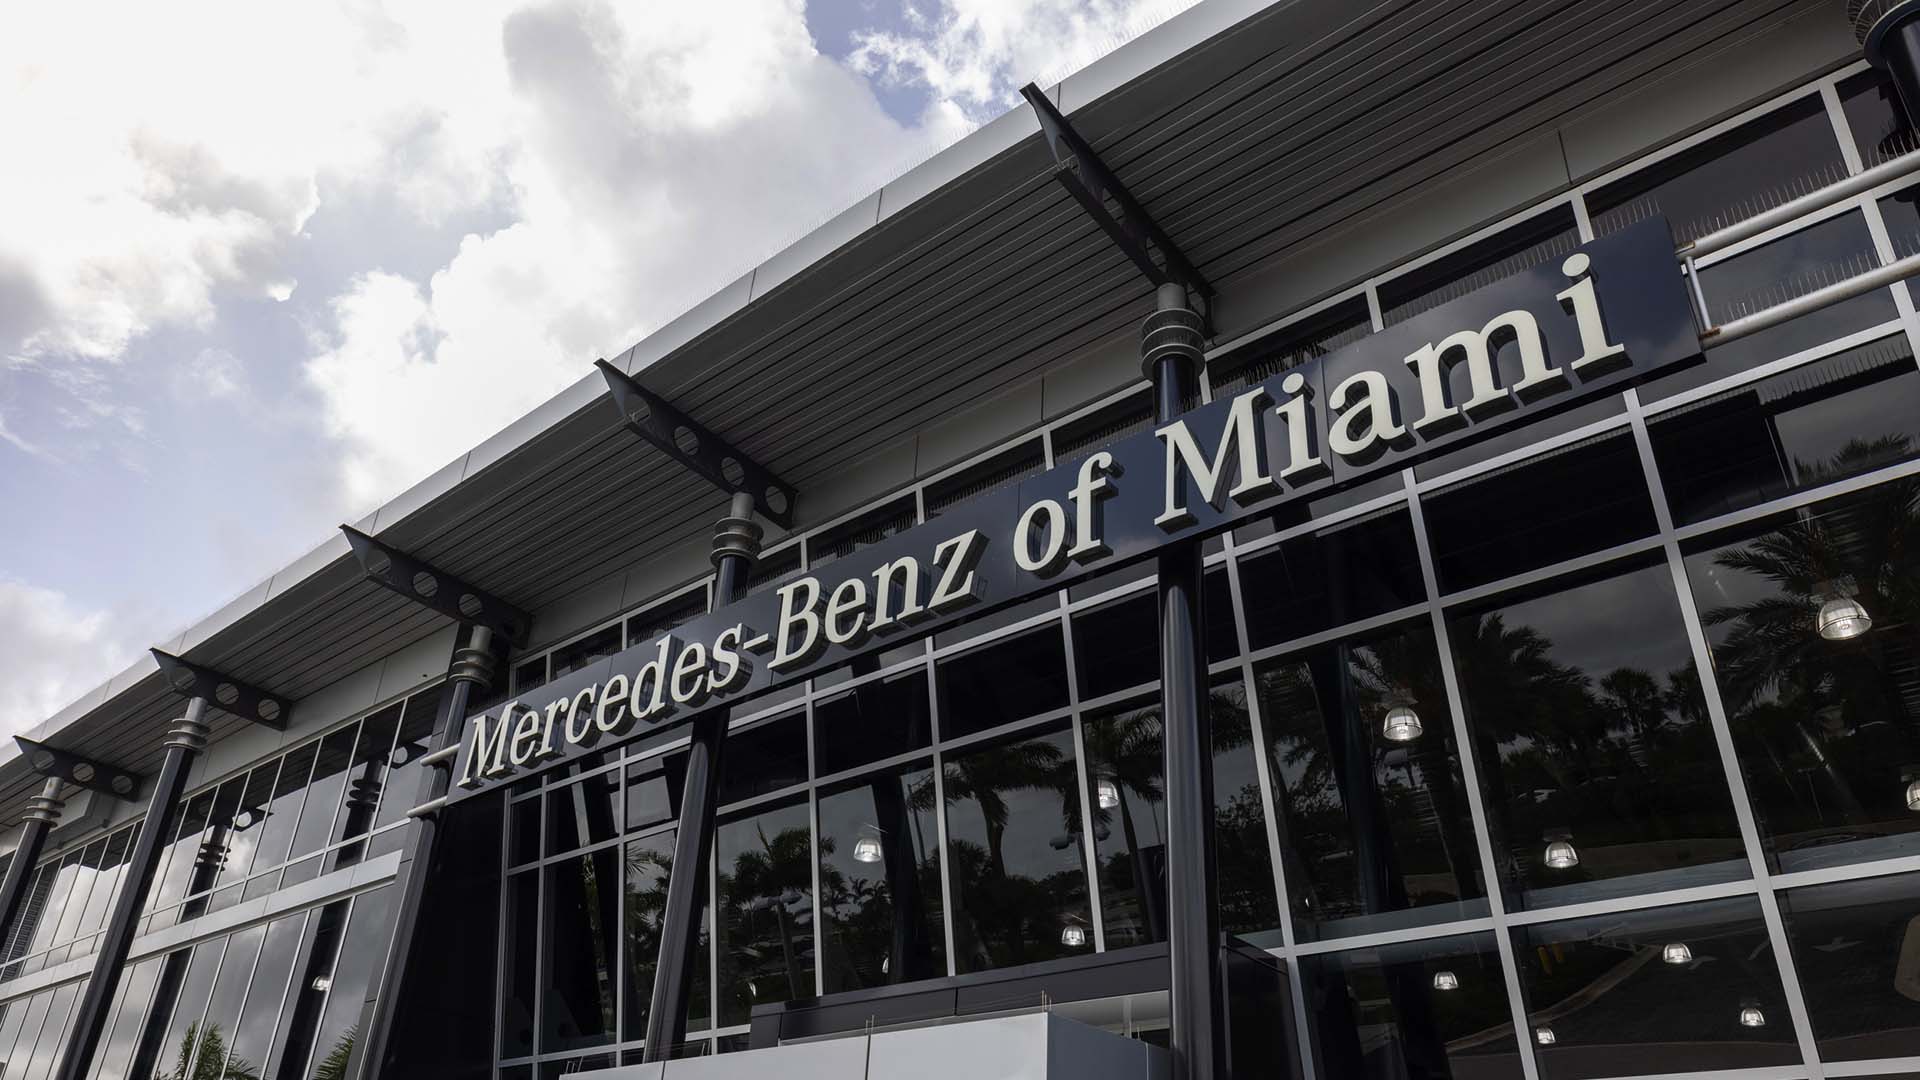 Exterior view of the Mercedes-Benz of Miami signage